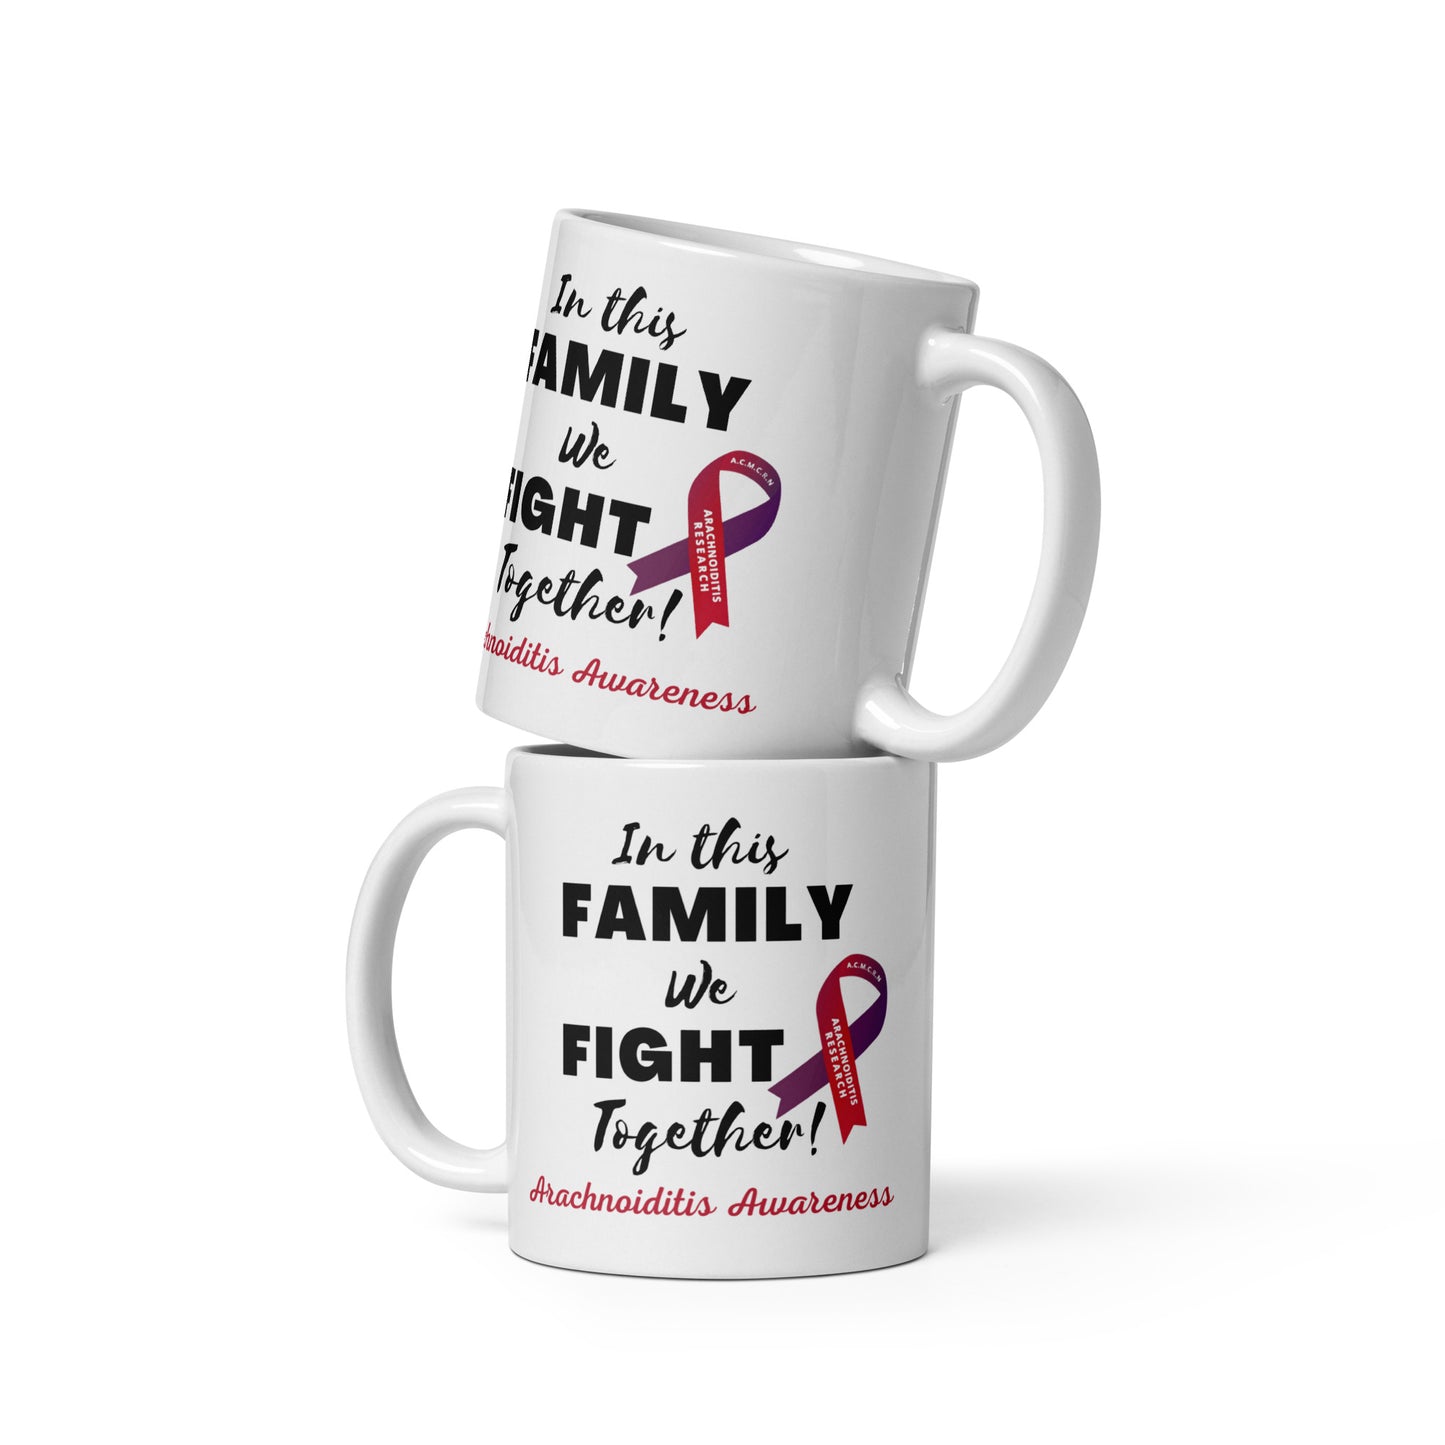 11oz, 15oz, or 20oz In This Family We Fight Together White glossy mug